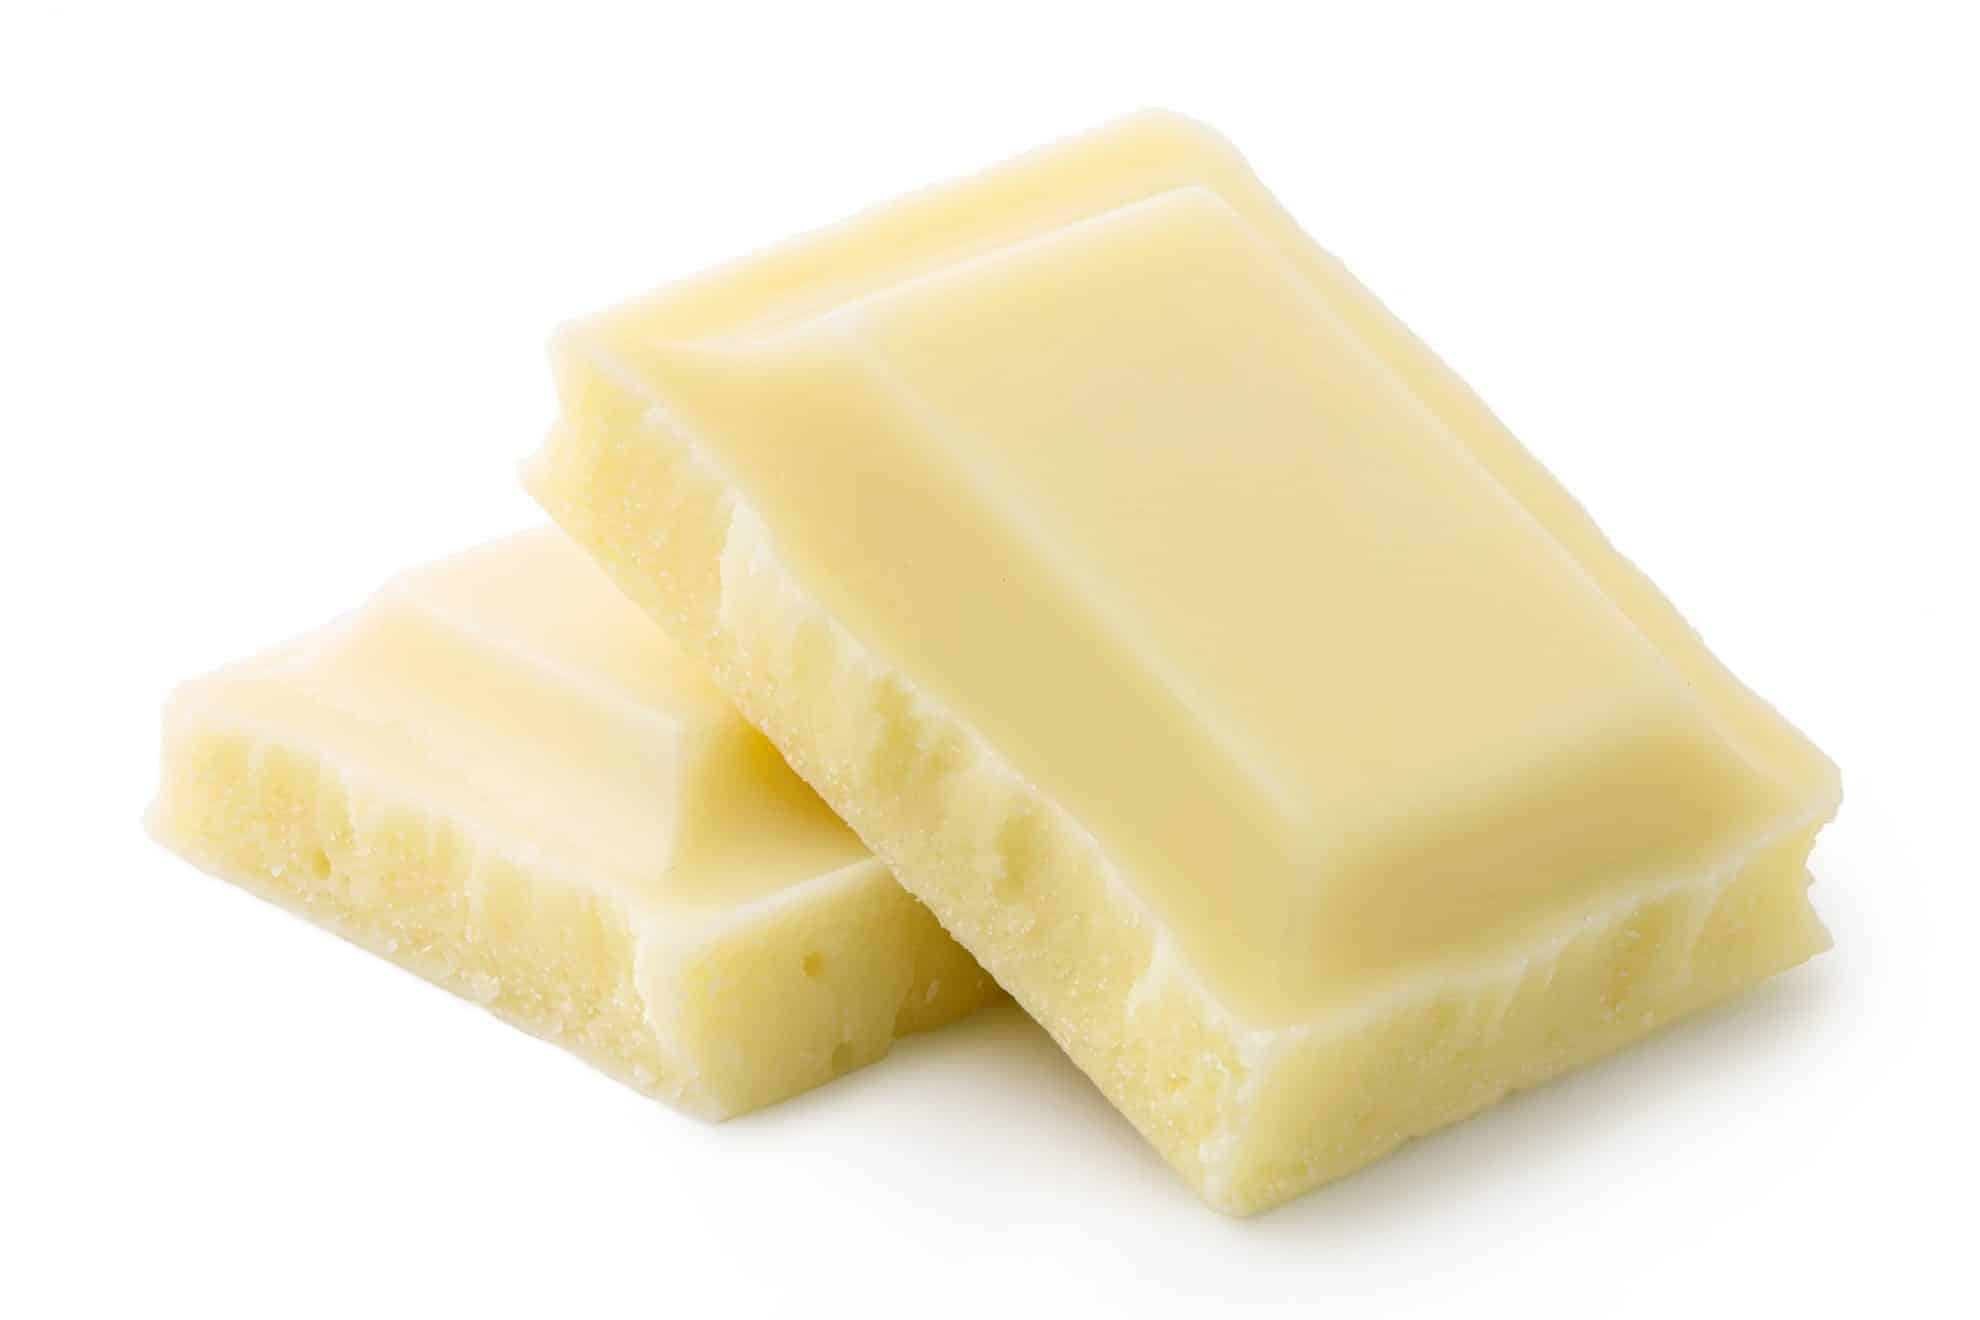 2 cubes of white chocolate